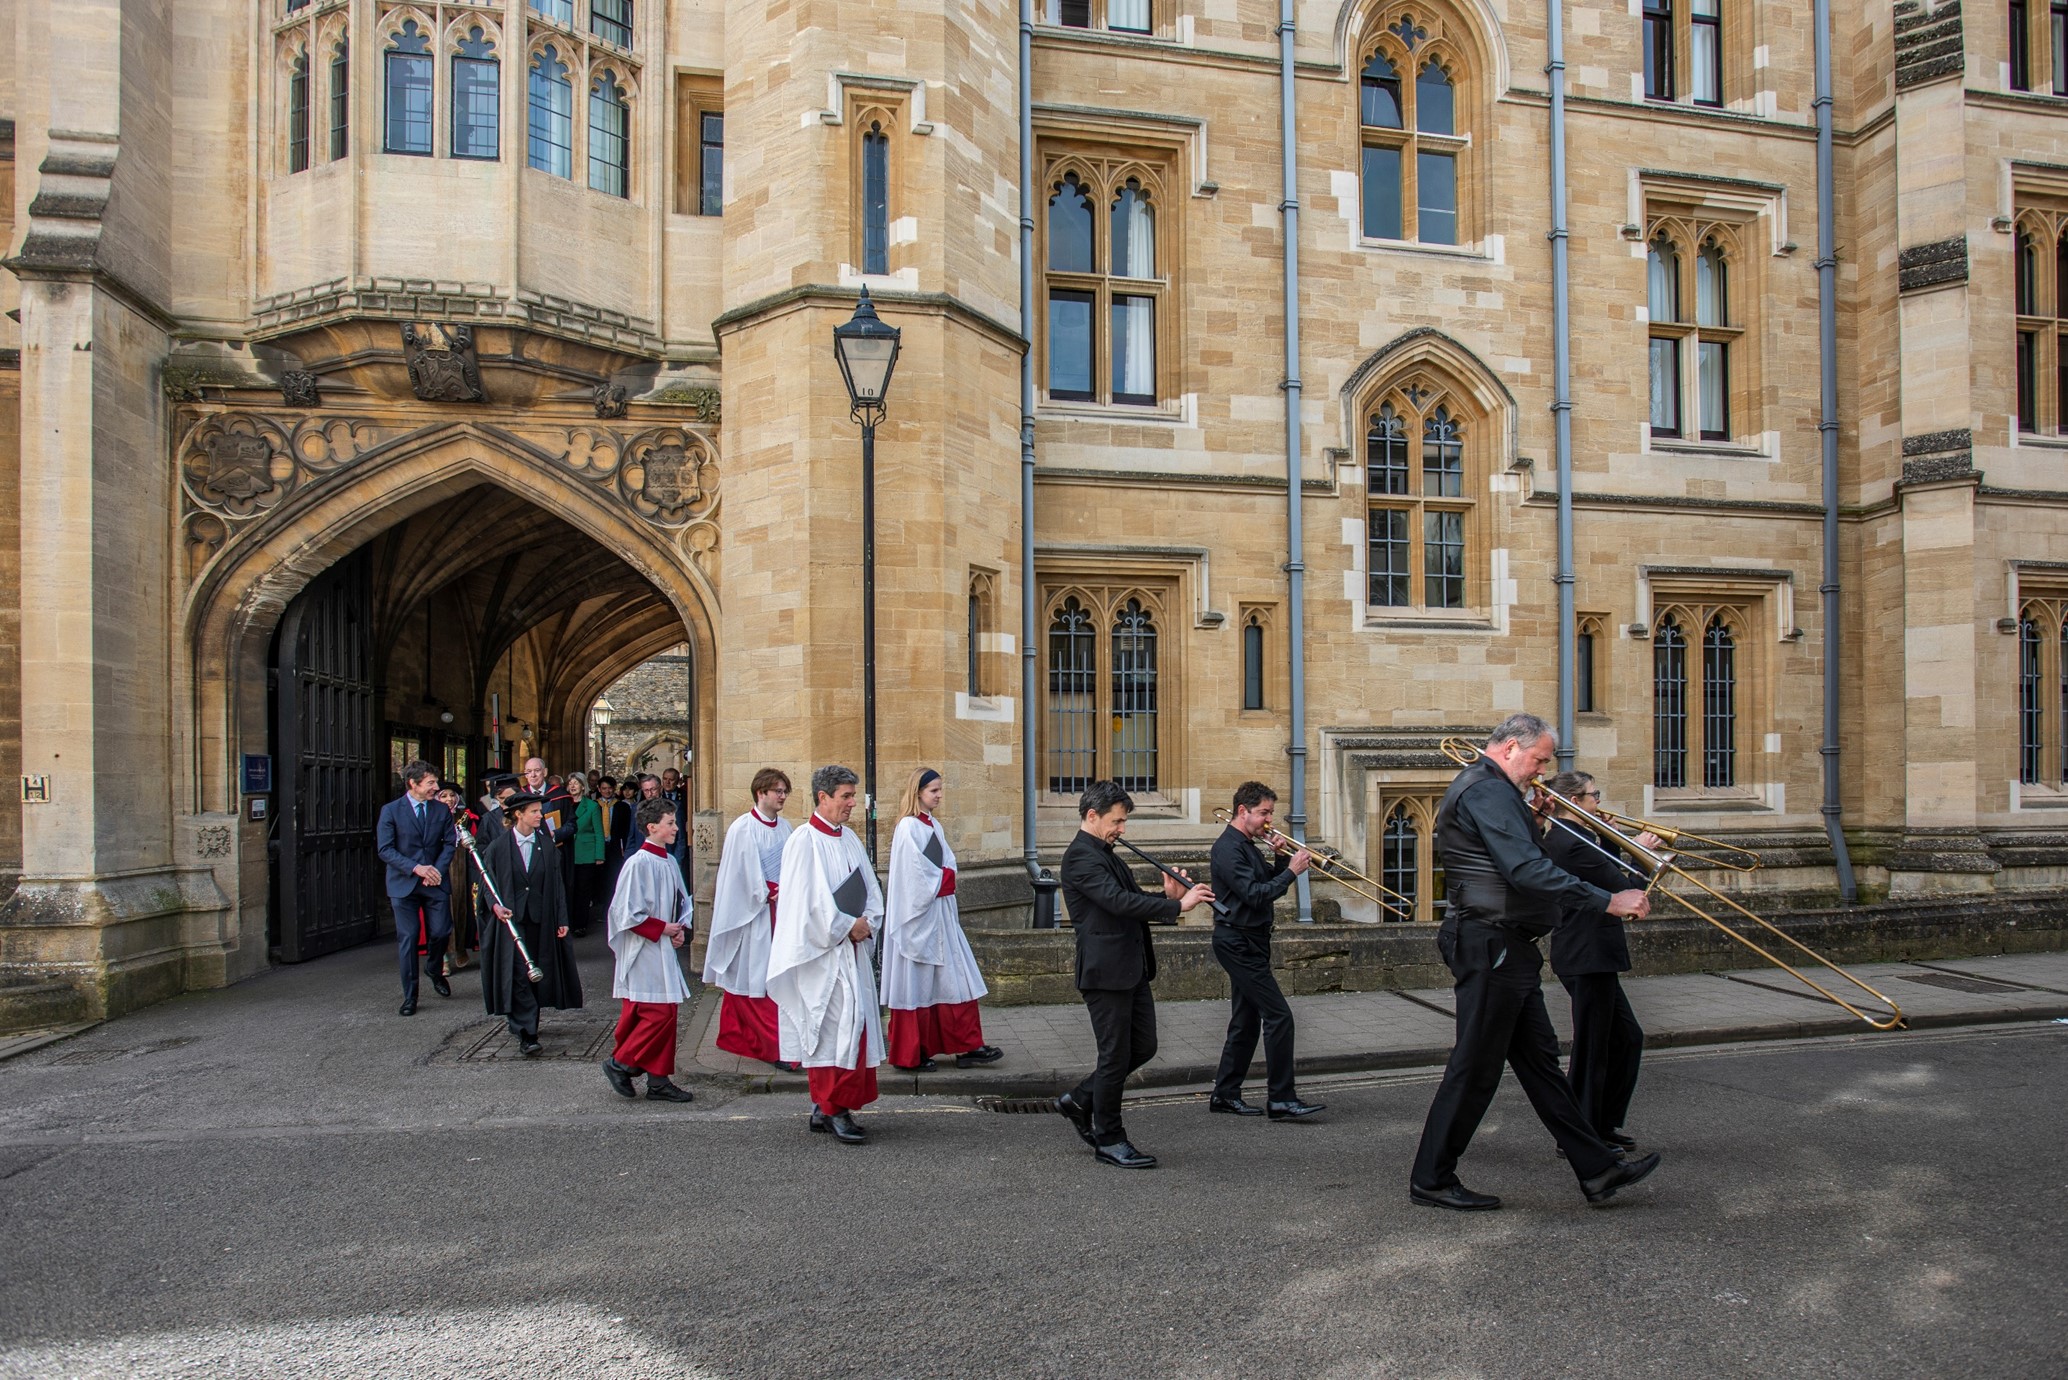 The procession leaves New College's main site on Holywell Street